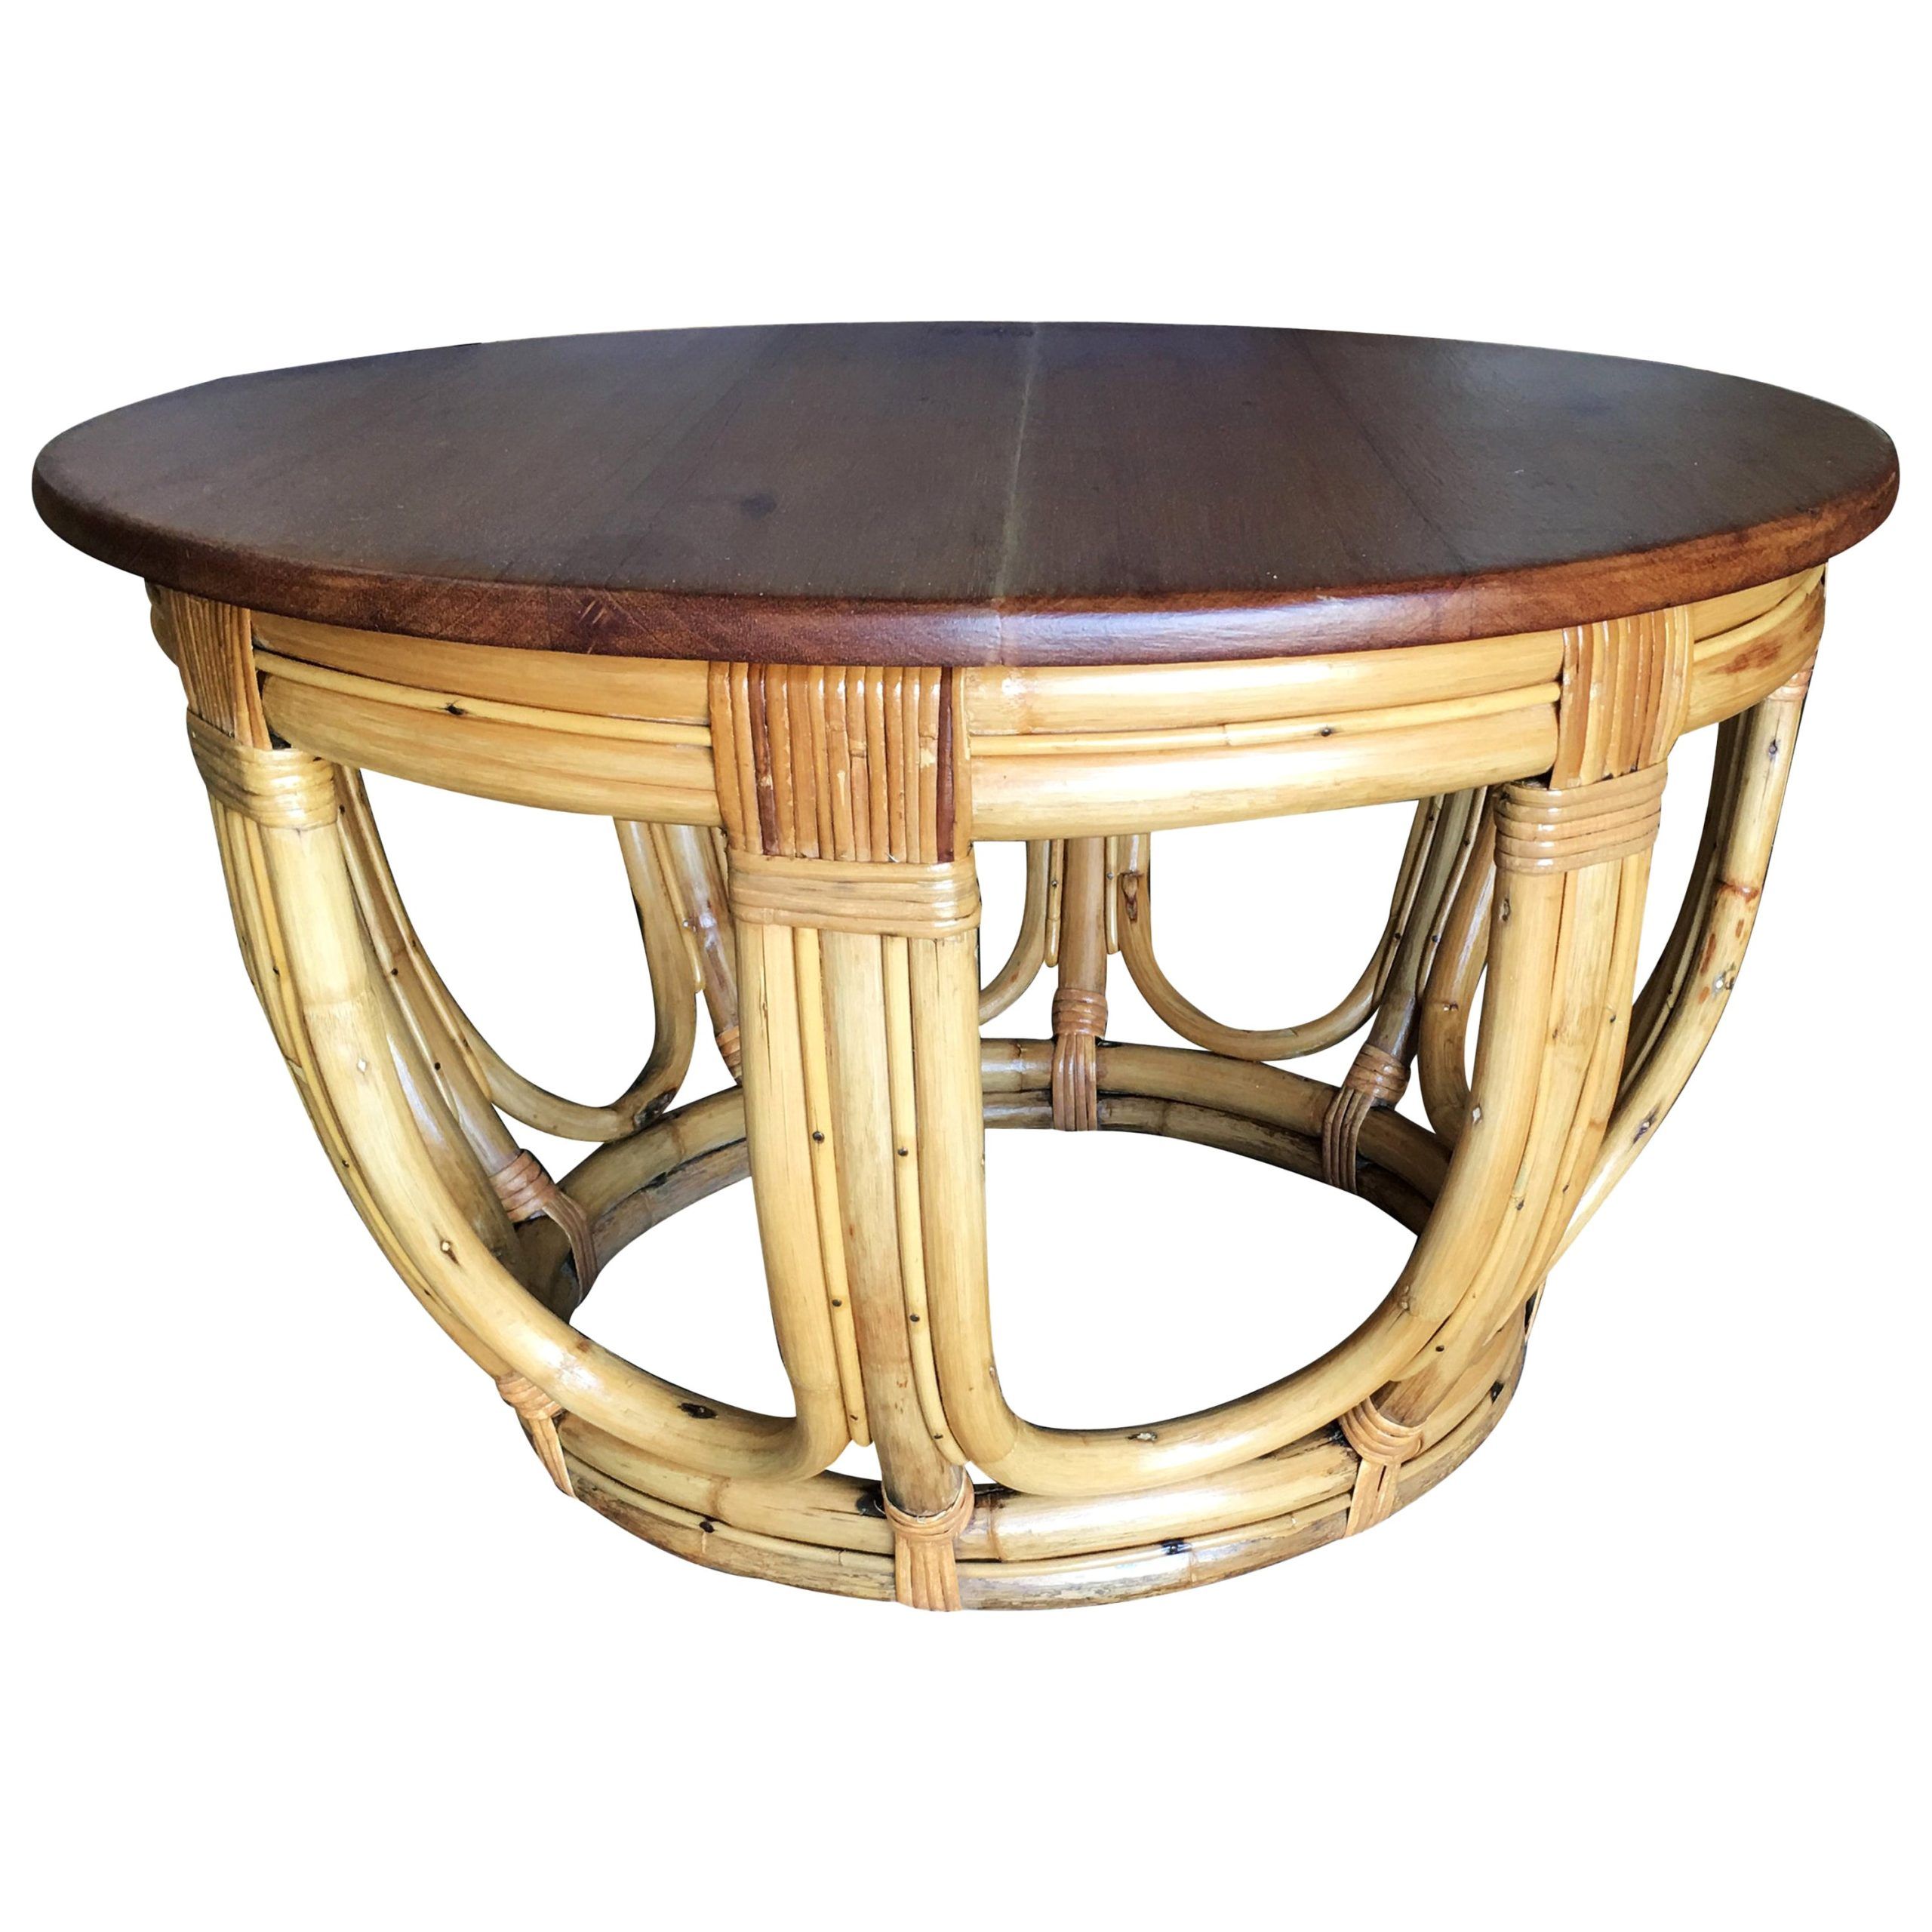 Restored Round Rattan Coffee Table With Mahogany Top For Sale At 1stdibs With Regard To Most Up To Date Rattan Coffee Tables (Photo 14 of 15)